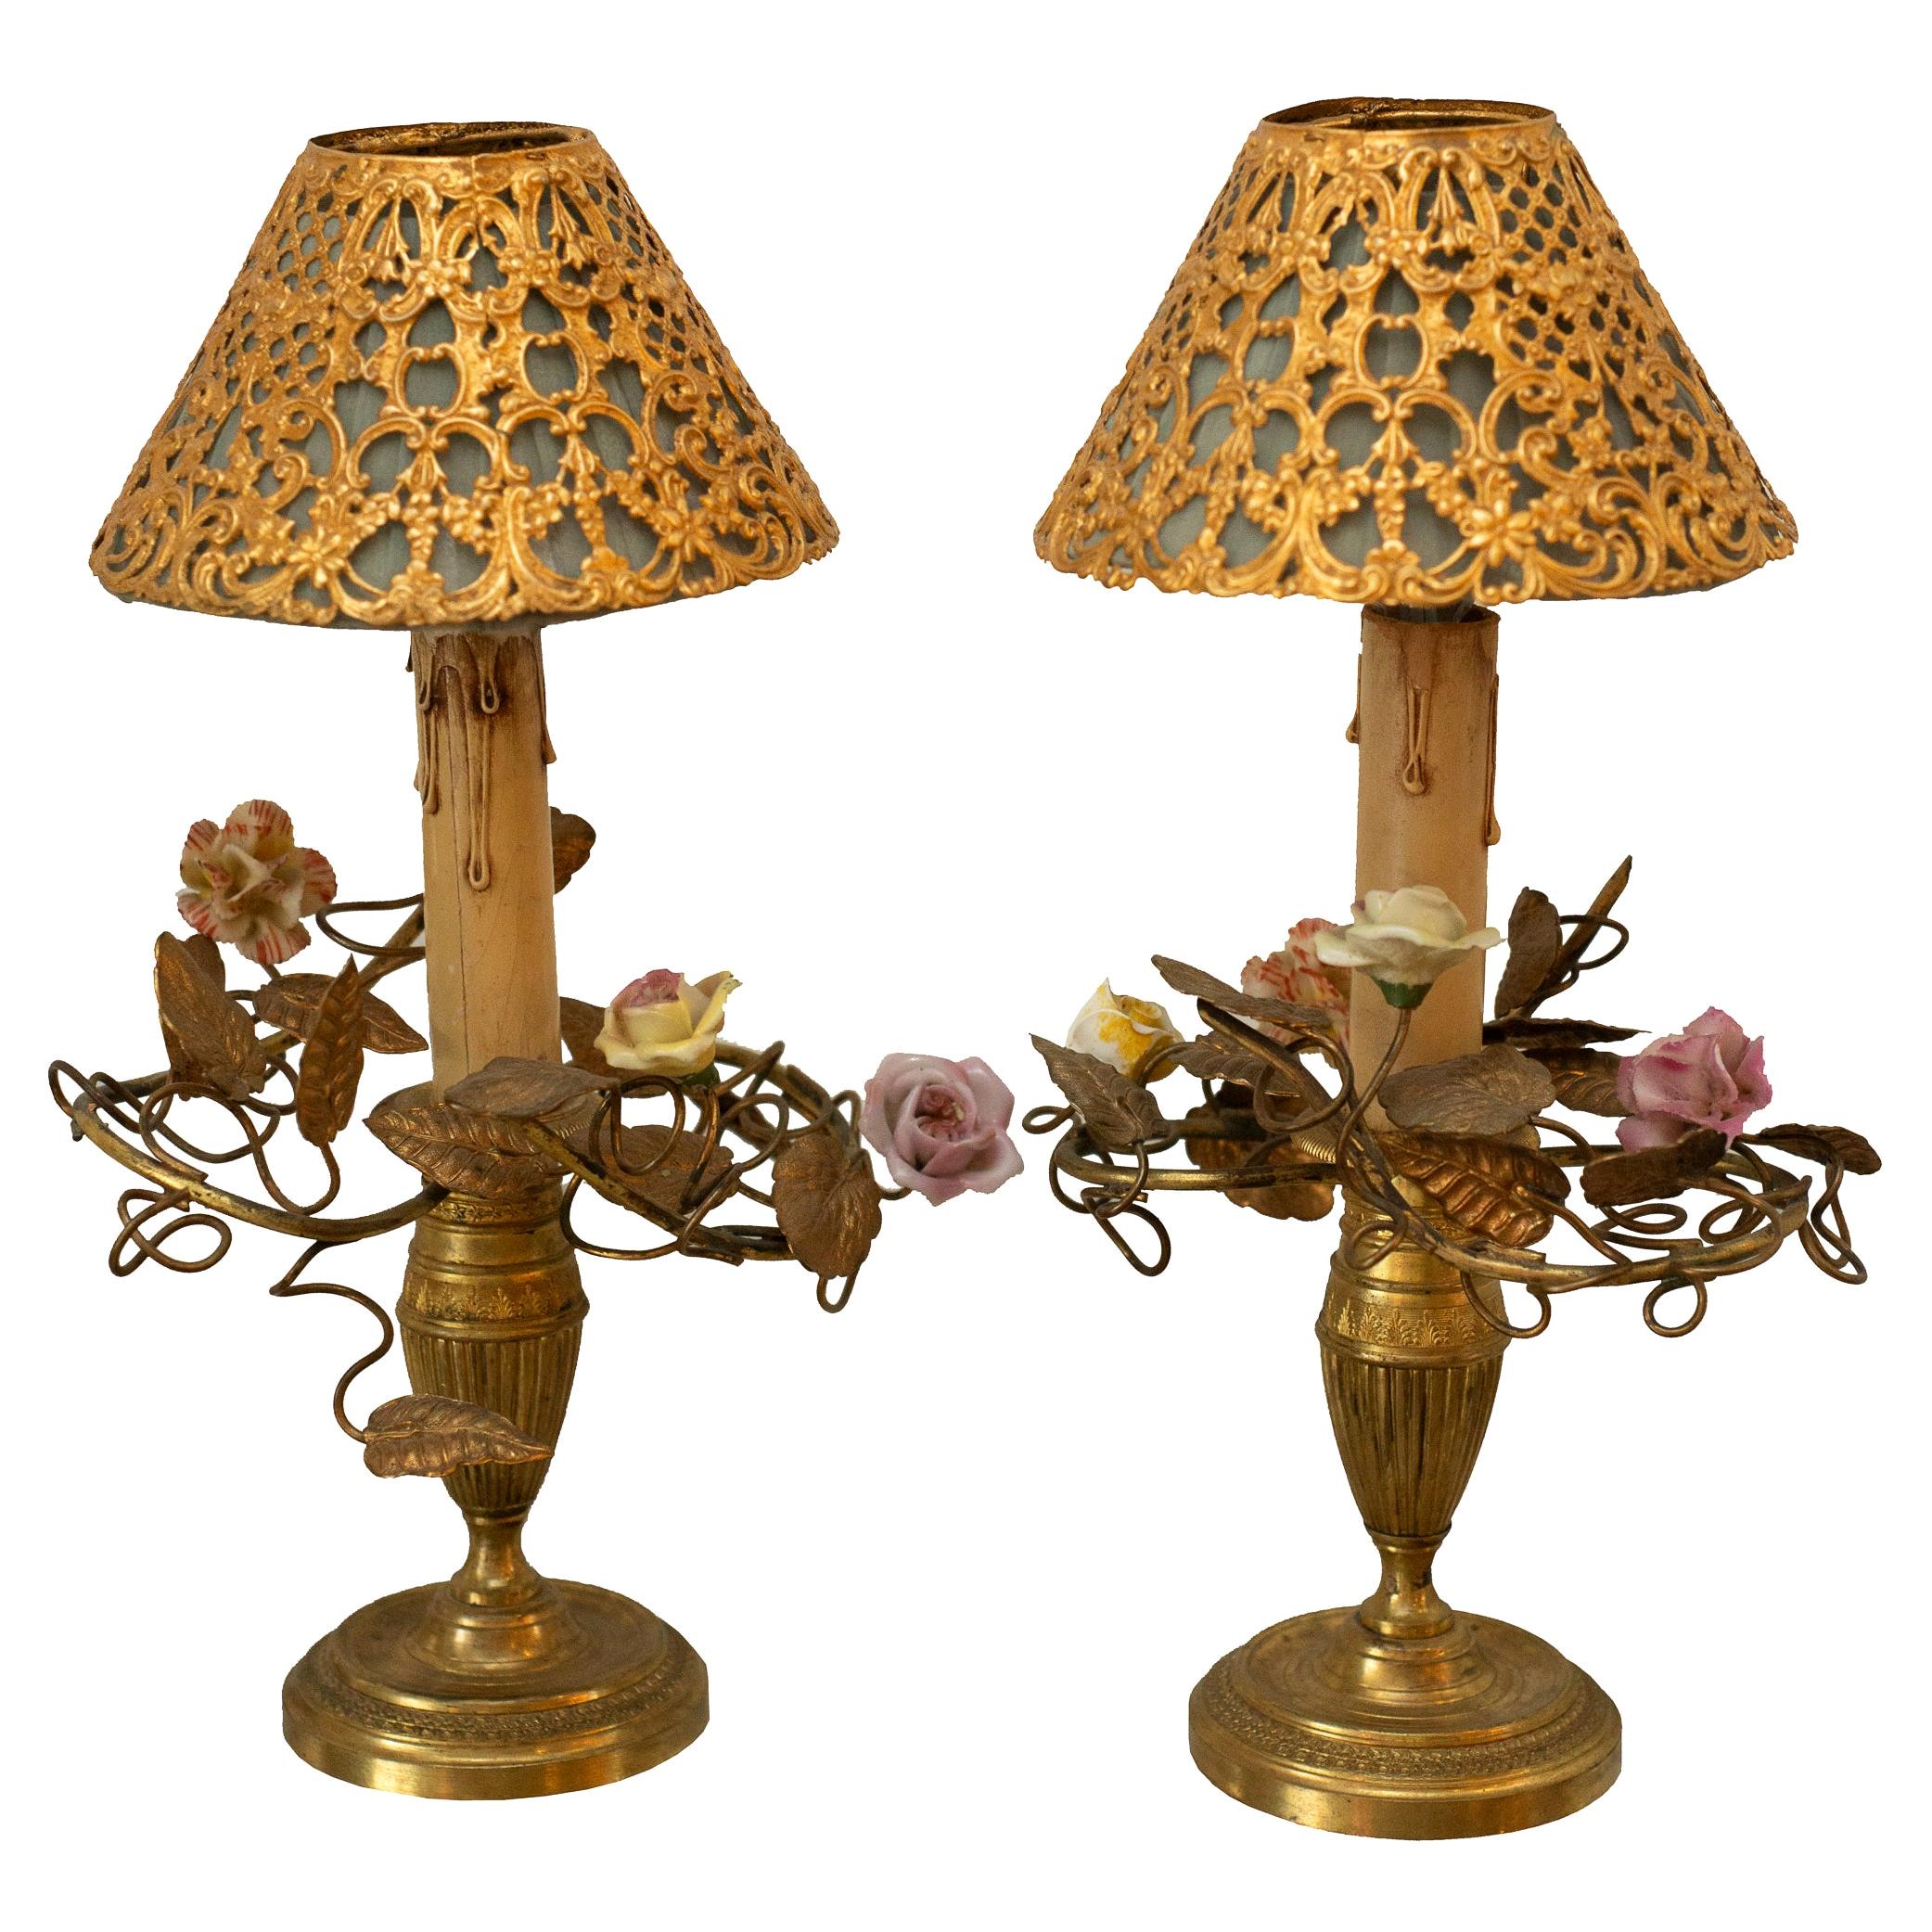 Antique Pair of French Lamps with Porcelain Flowers and Metal and Silk Shades